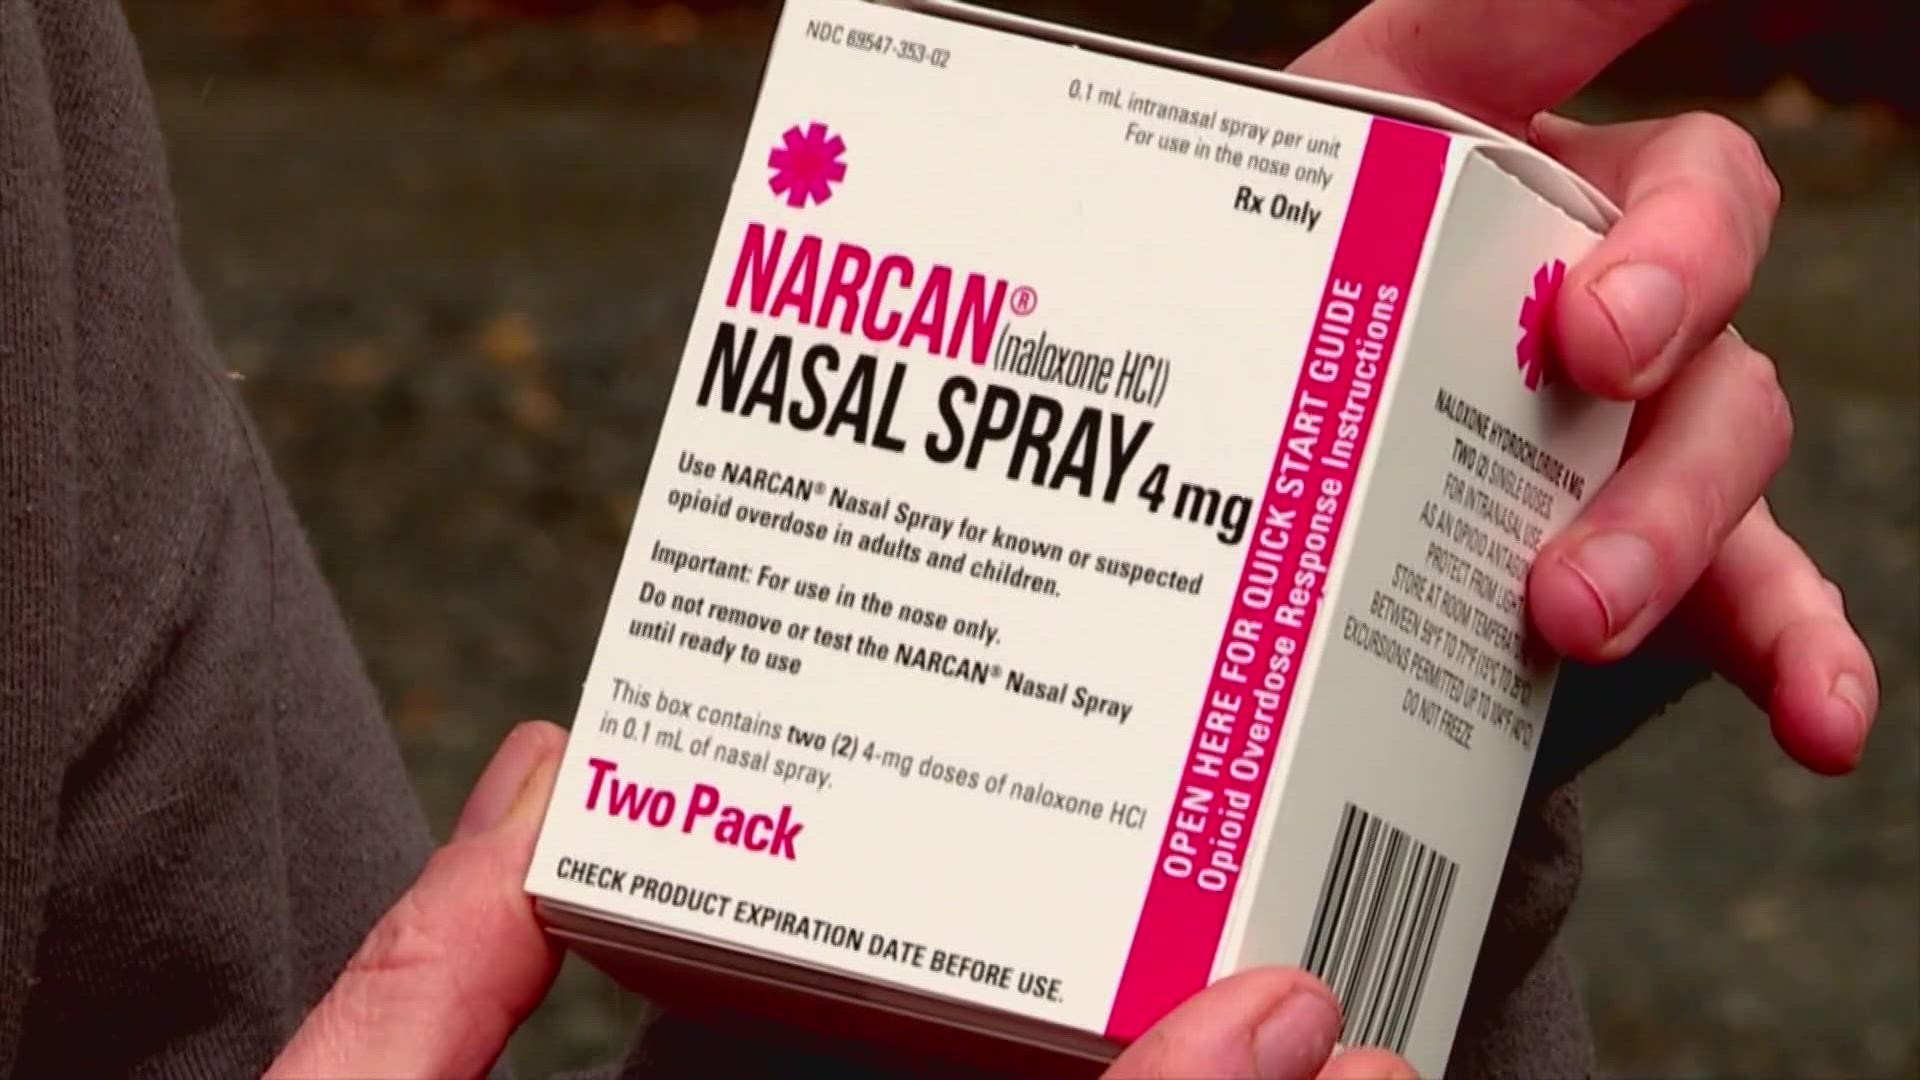 Carrying Narcan is becoming the new normal for many, as cases of Fentanyl drug overdoses continue to climb.